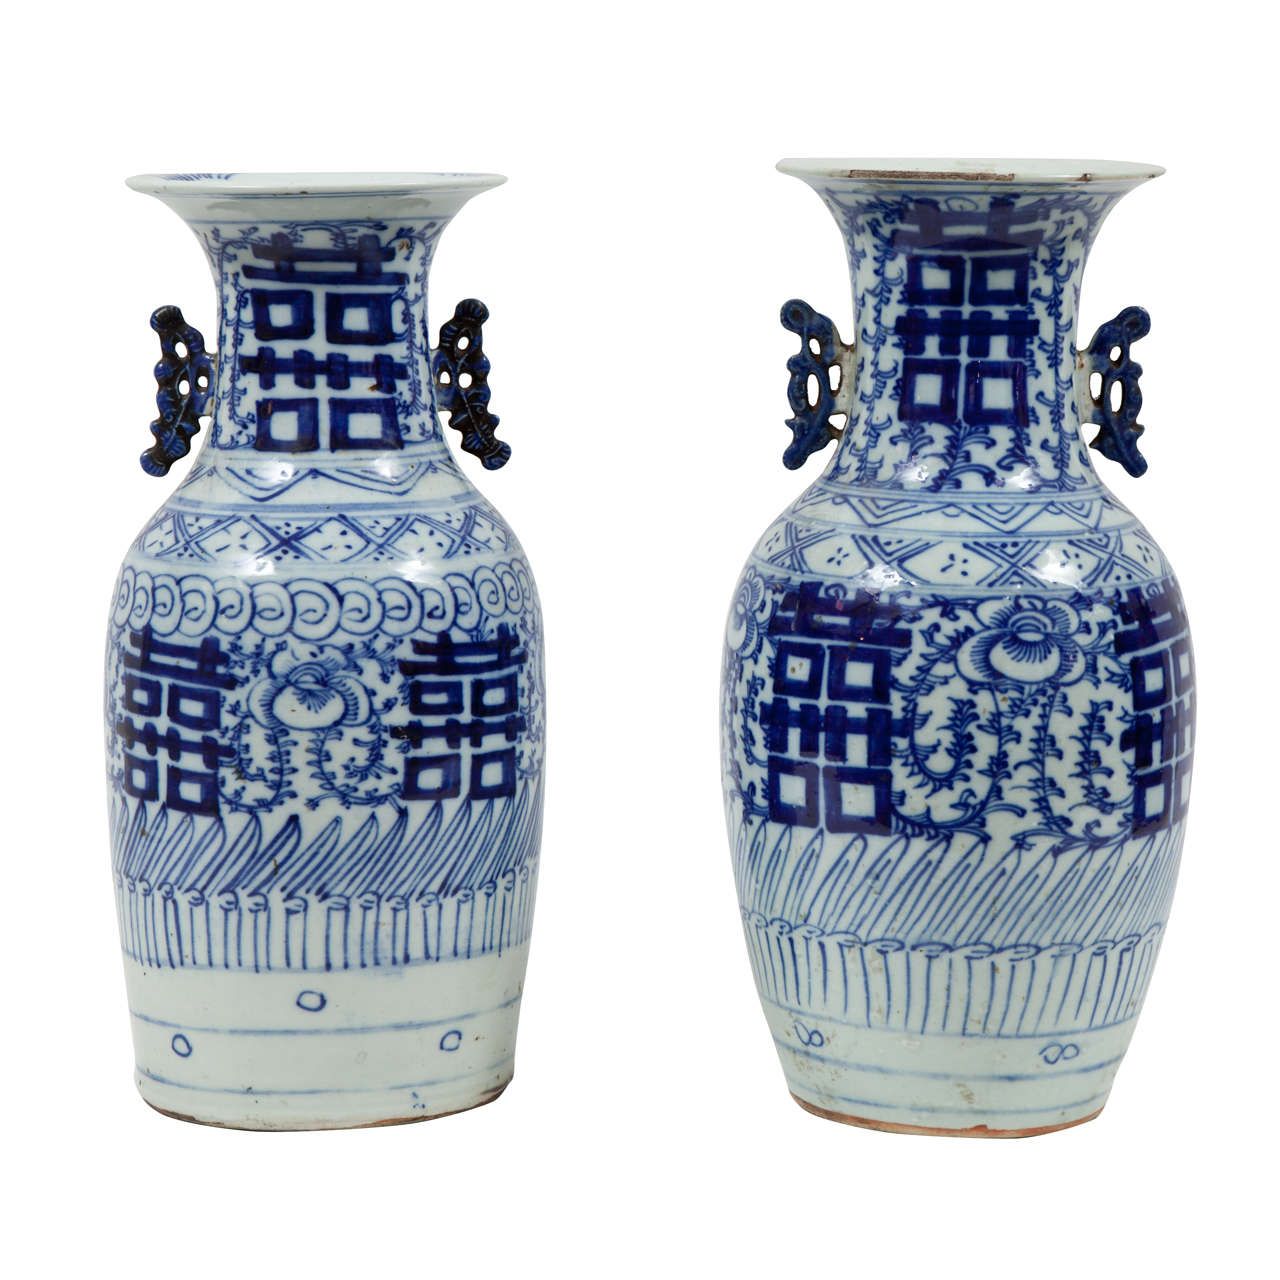 Automatic recomended pottery Asian garden